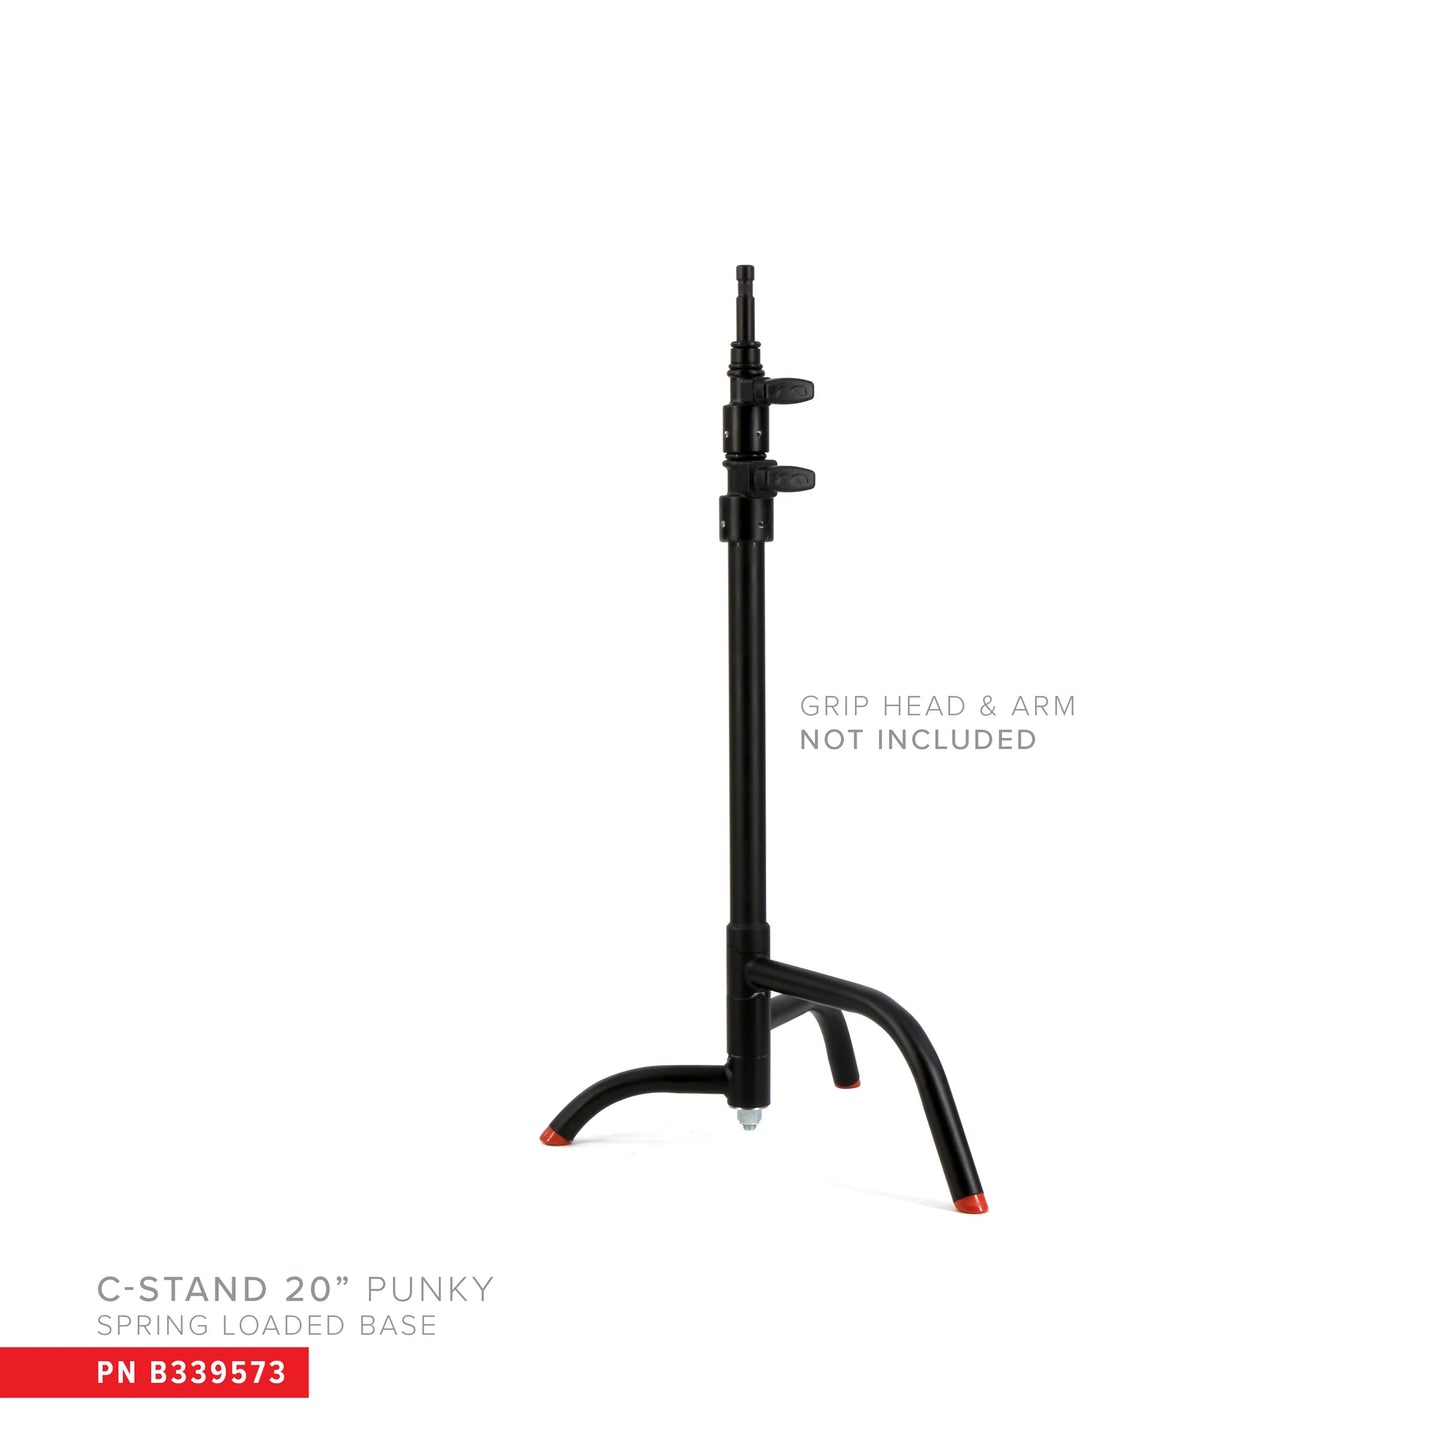 Matthews 20" C-Stand - "PUNKY" w/ Spring Loaded Base